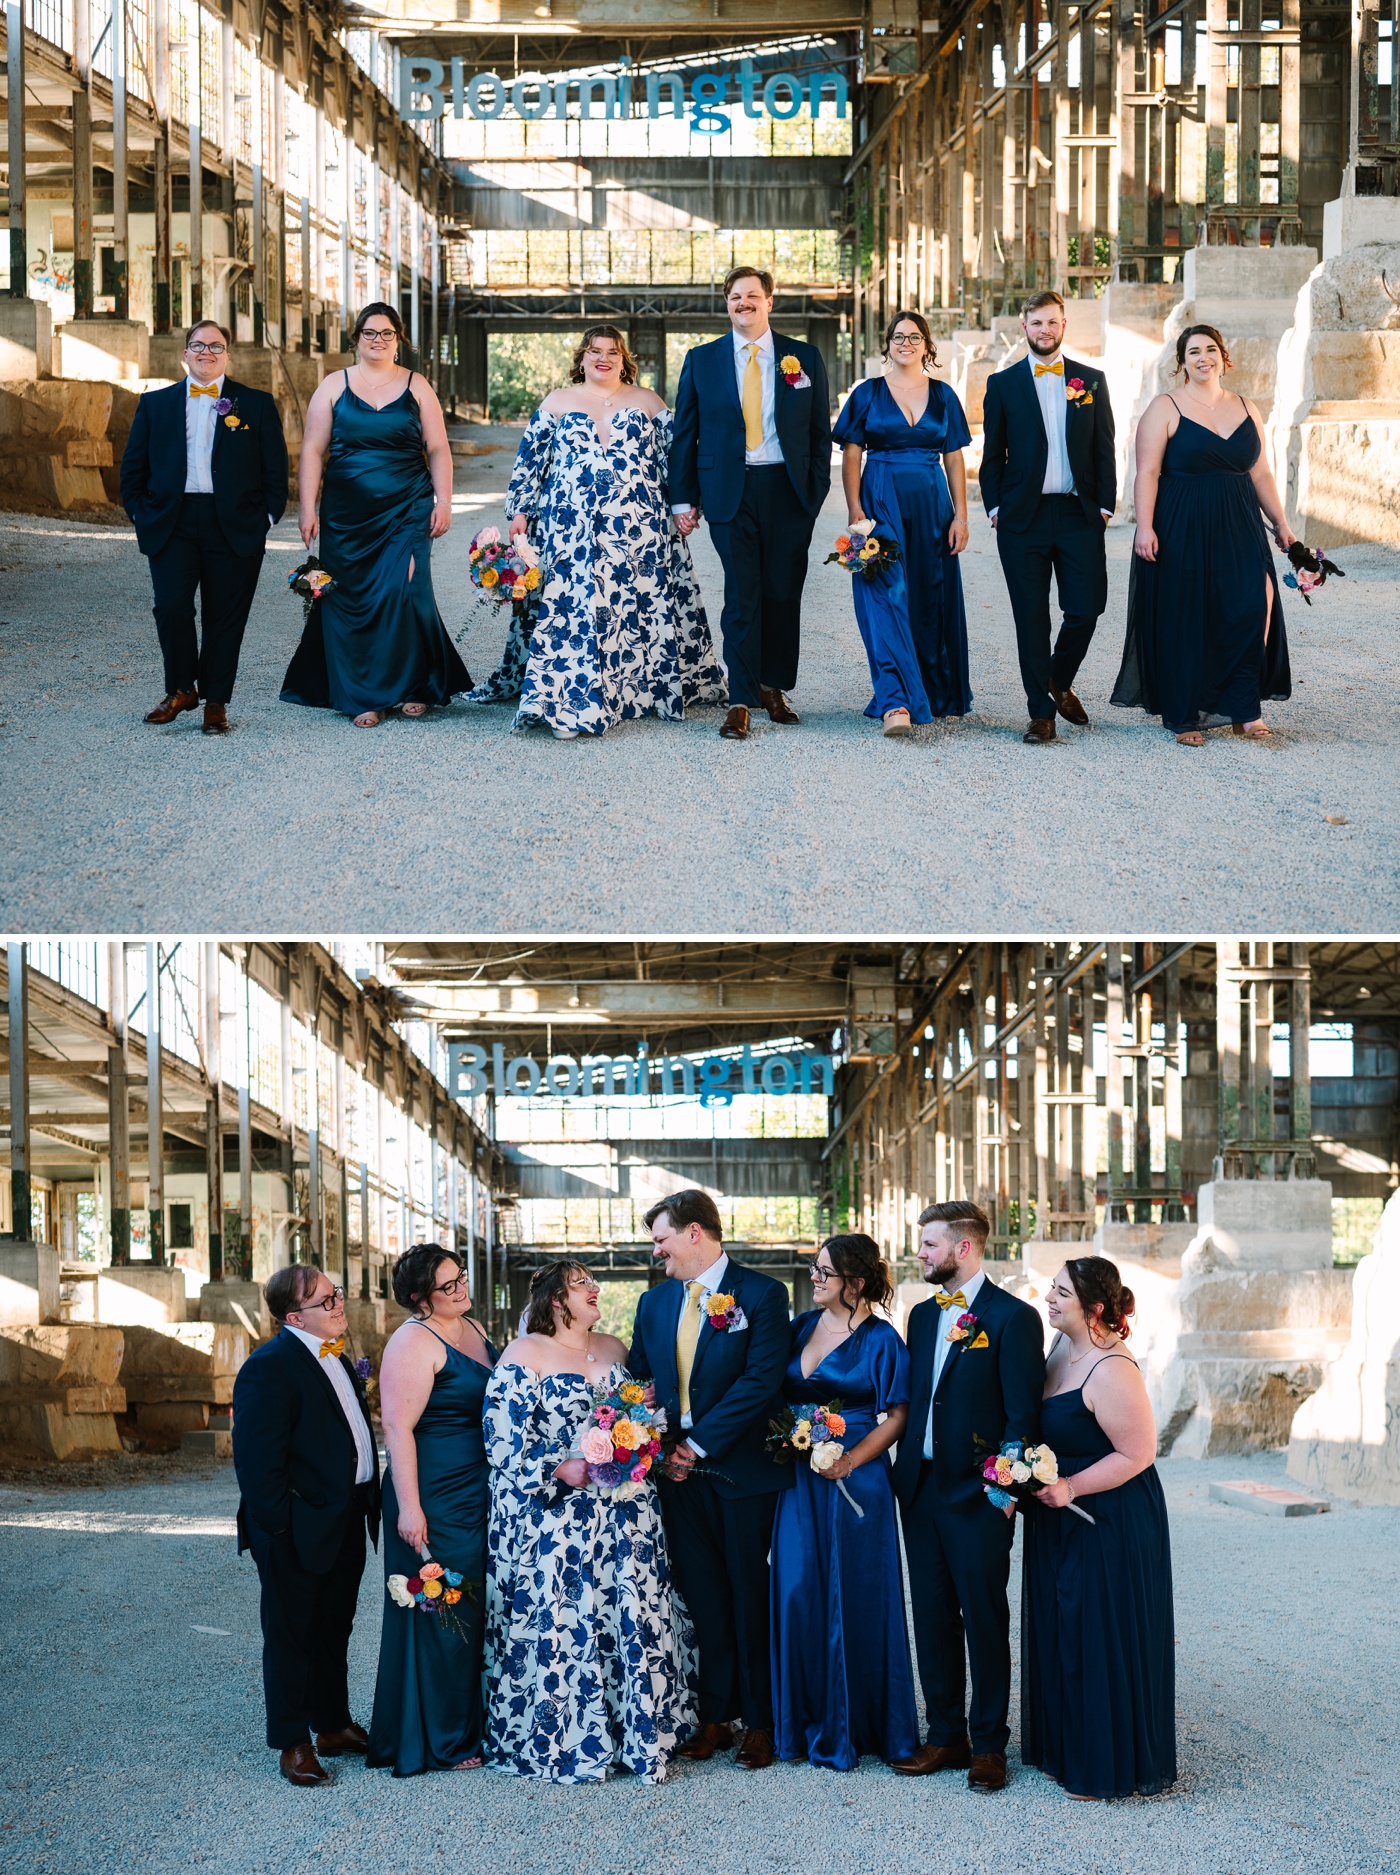 Bridal party portraits at the Woolery Mill